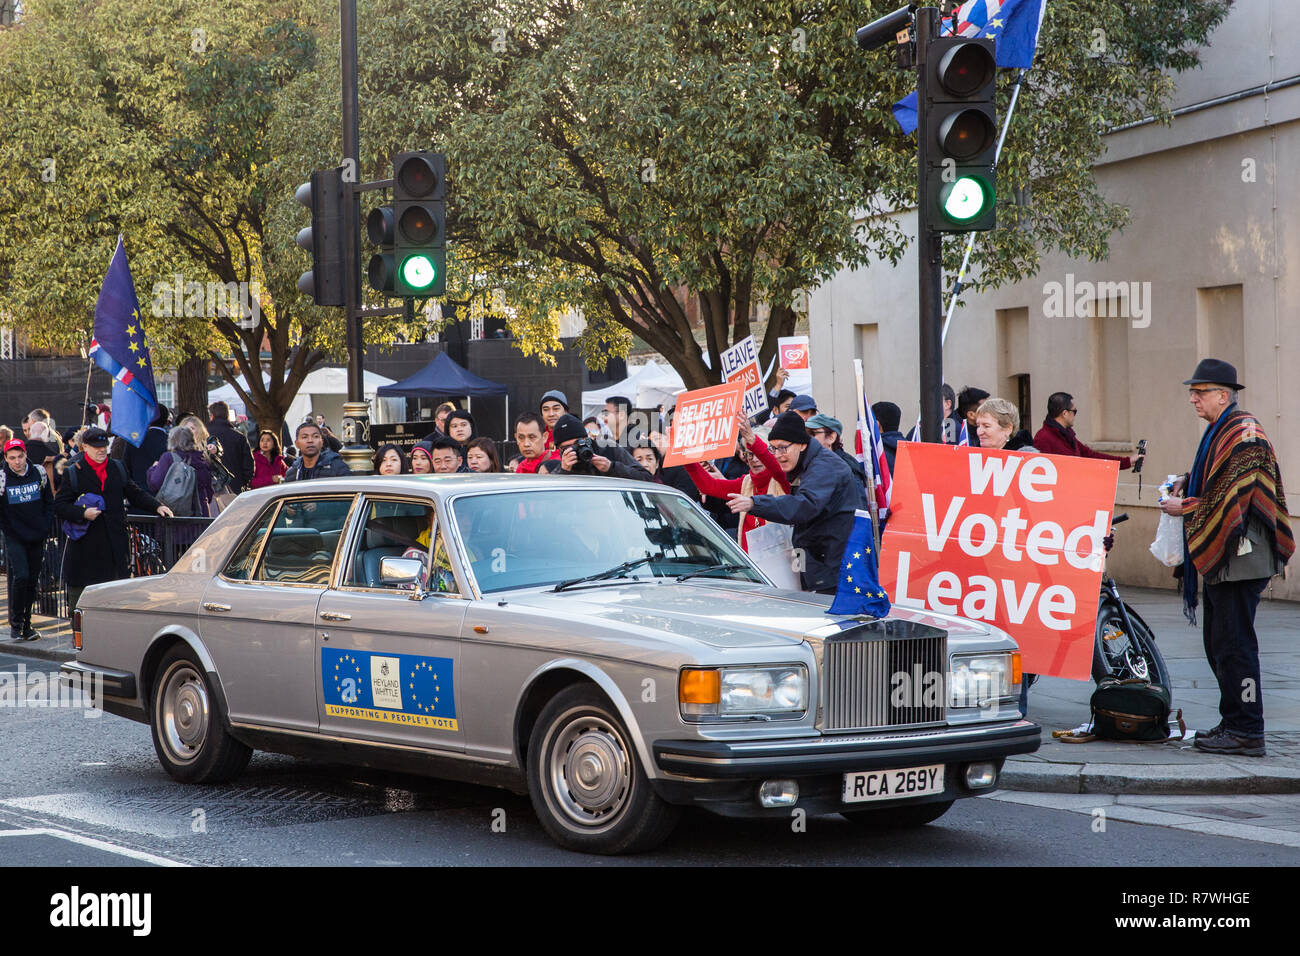 London, UK. 11th December, 2018. Pro-Brexit activists jeer at the occupants of a Rolls Royce adorned with pro-EU stickers and an EU flag during rival protests outside Parliament on the day on which a vote was originally to have been scheduled on completion of a House of Commons debate on the Government's draft Brexit withdrawal agreement. Credit: Mark Kerrison/Alamy Live News Stock Photo